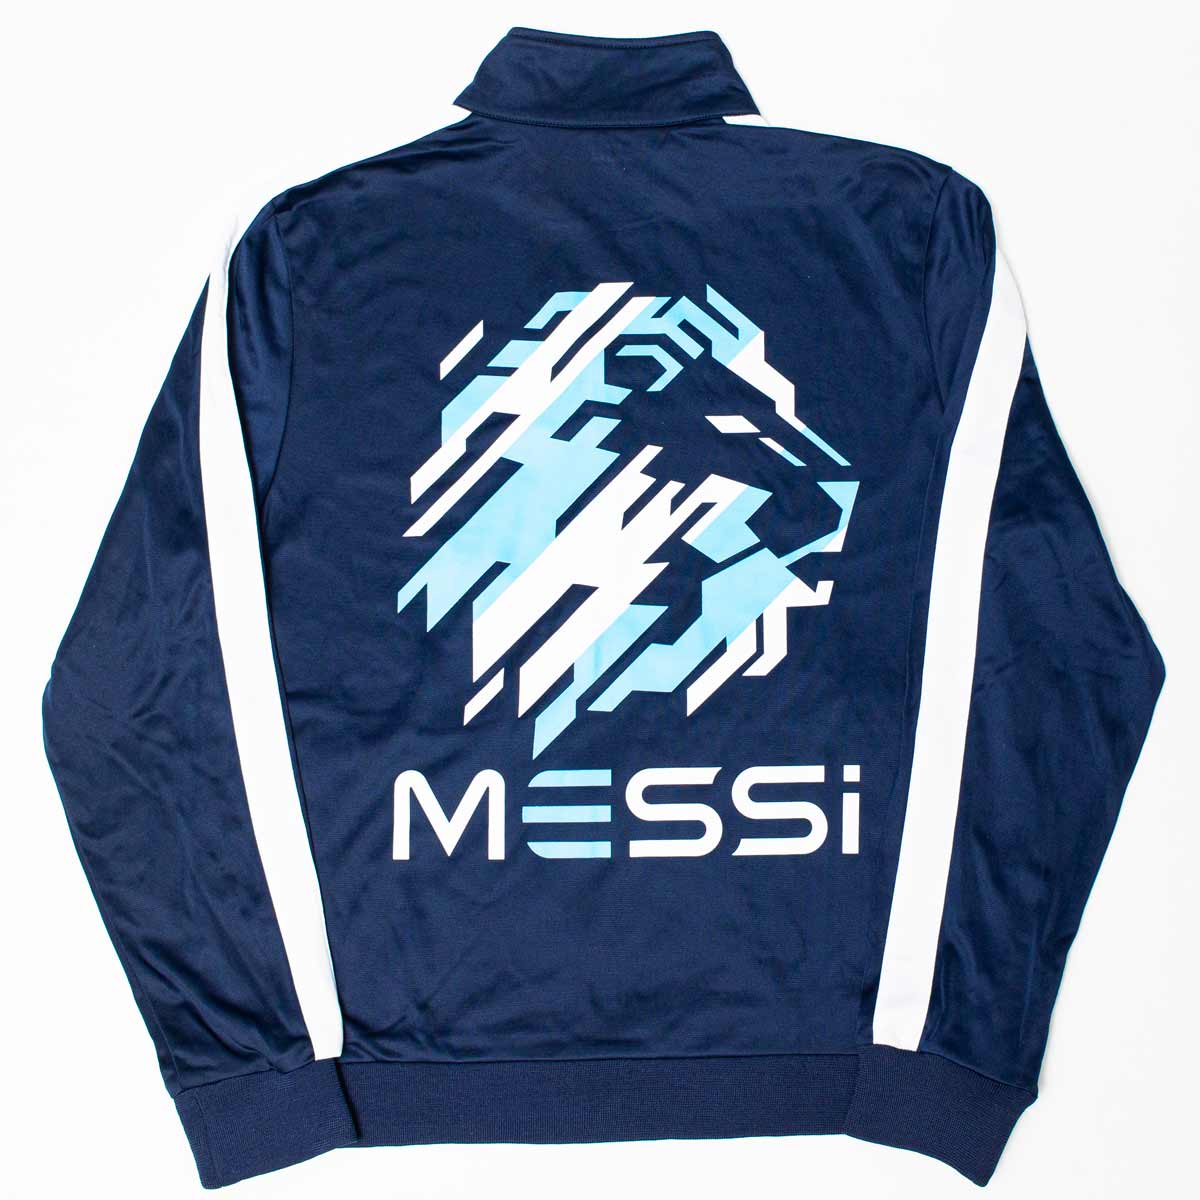 Messi Zip Up Jacket in Navy and White image number 2